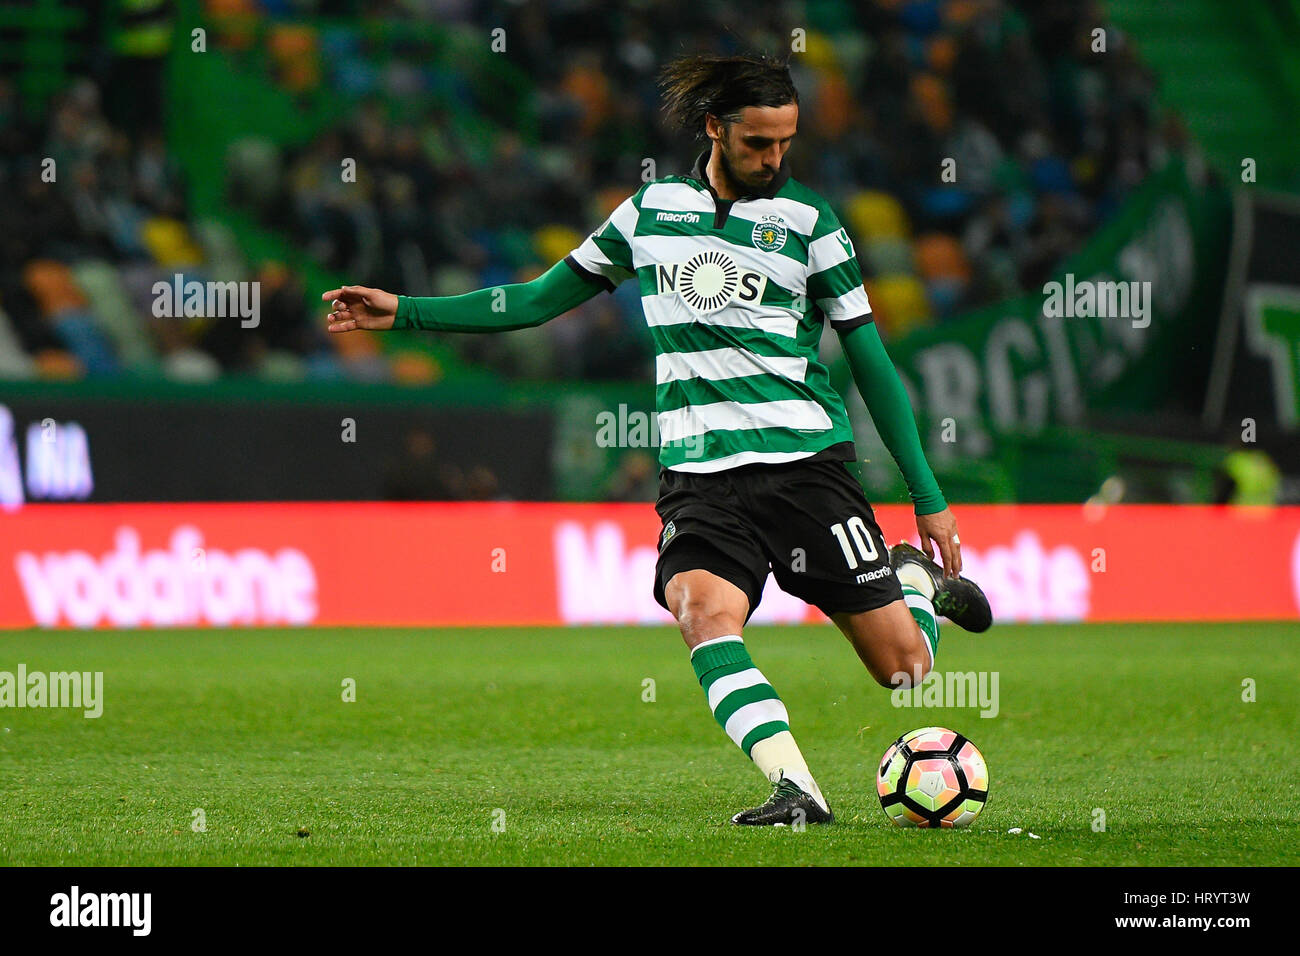 Portugal, Lisbon, Mar. 05, 2017 - FOOTBALL - Bryan Ruiz, Sporting player, in action during match between Sporting Clube de Portugal and Vitória Guimarães for Portuguese Football League match at Estádio Alvalade XXI, in Lisbon, Portugal. Credit: Bruno de Carvalho/Alamy Live News Stock Photo